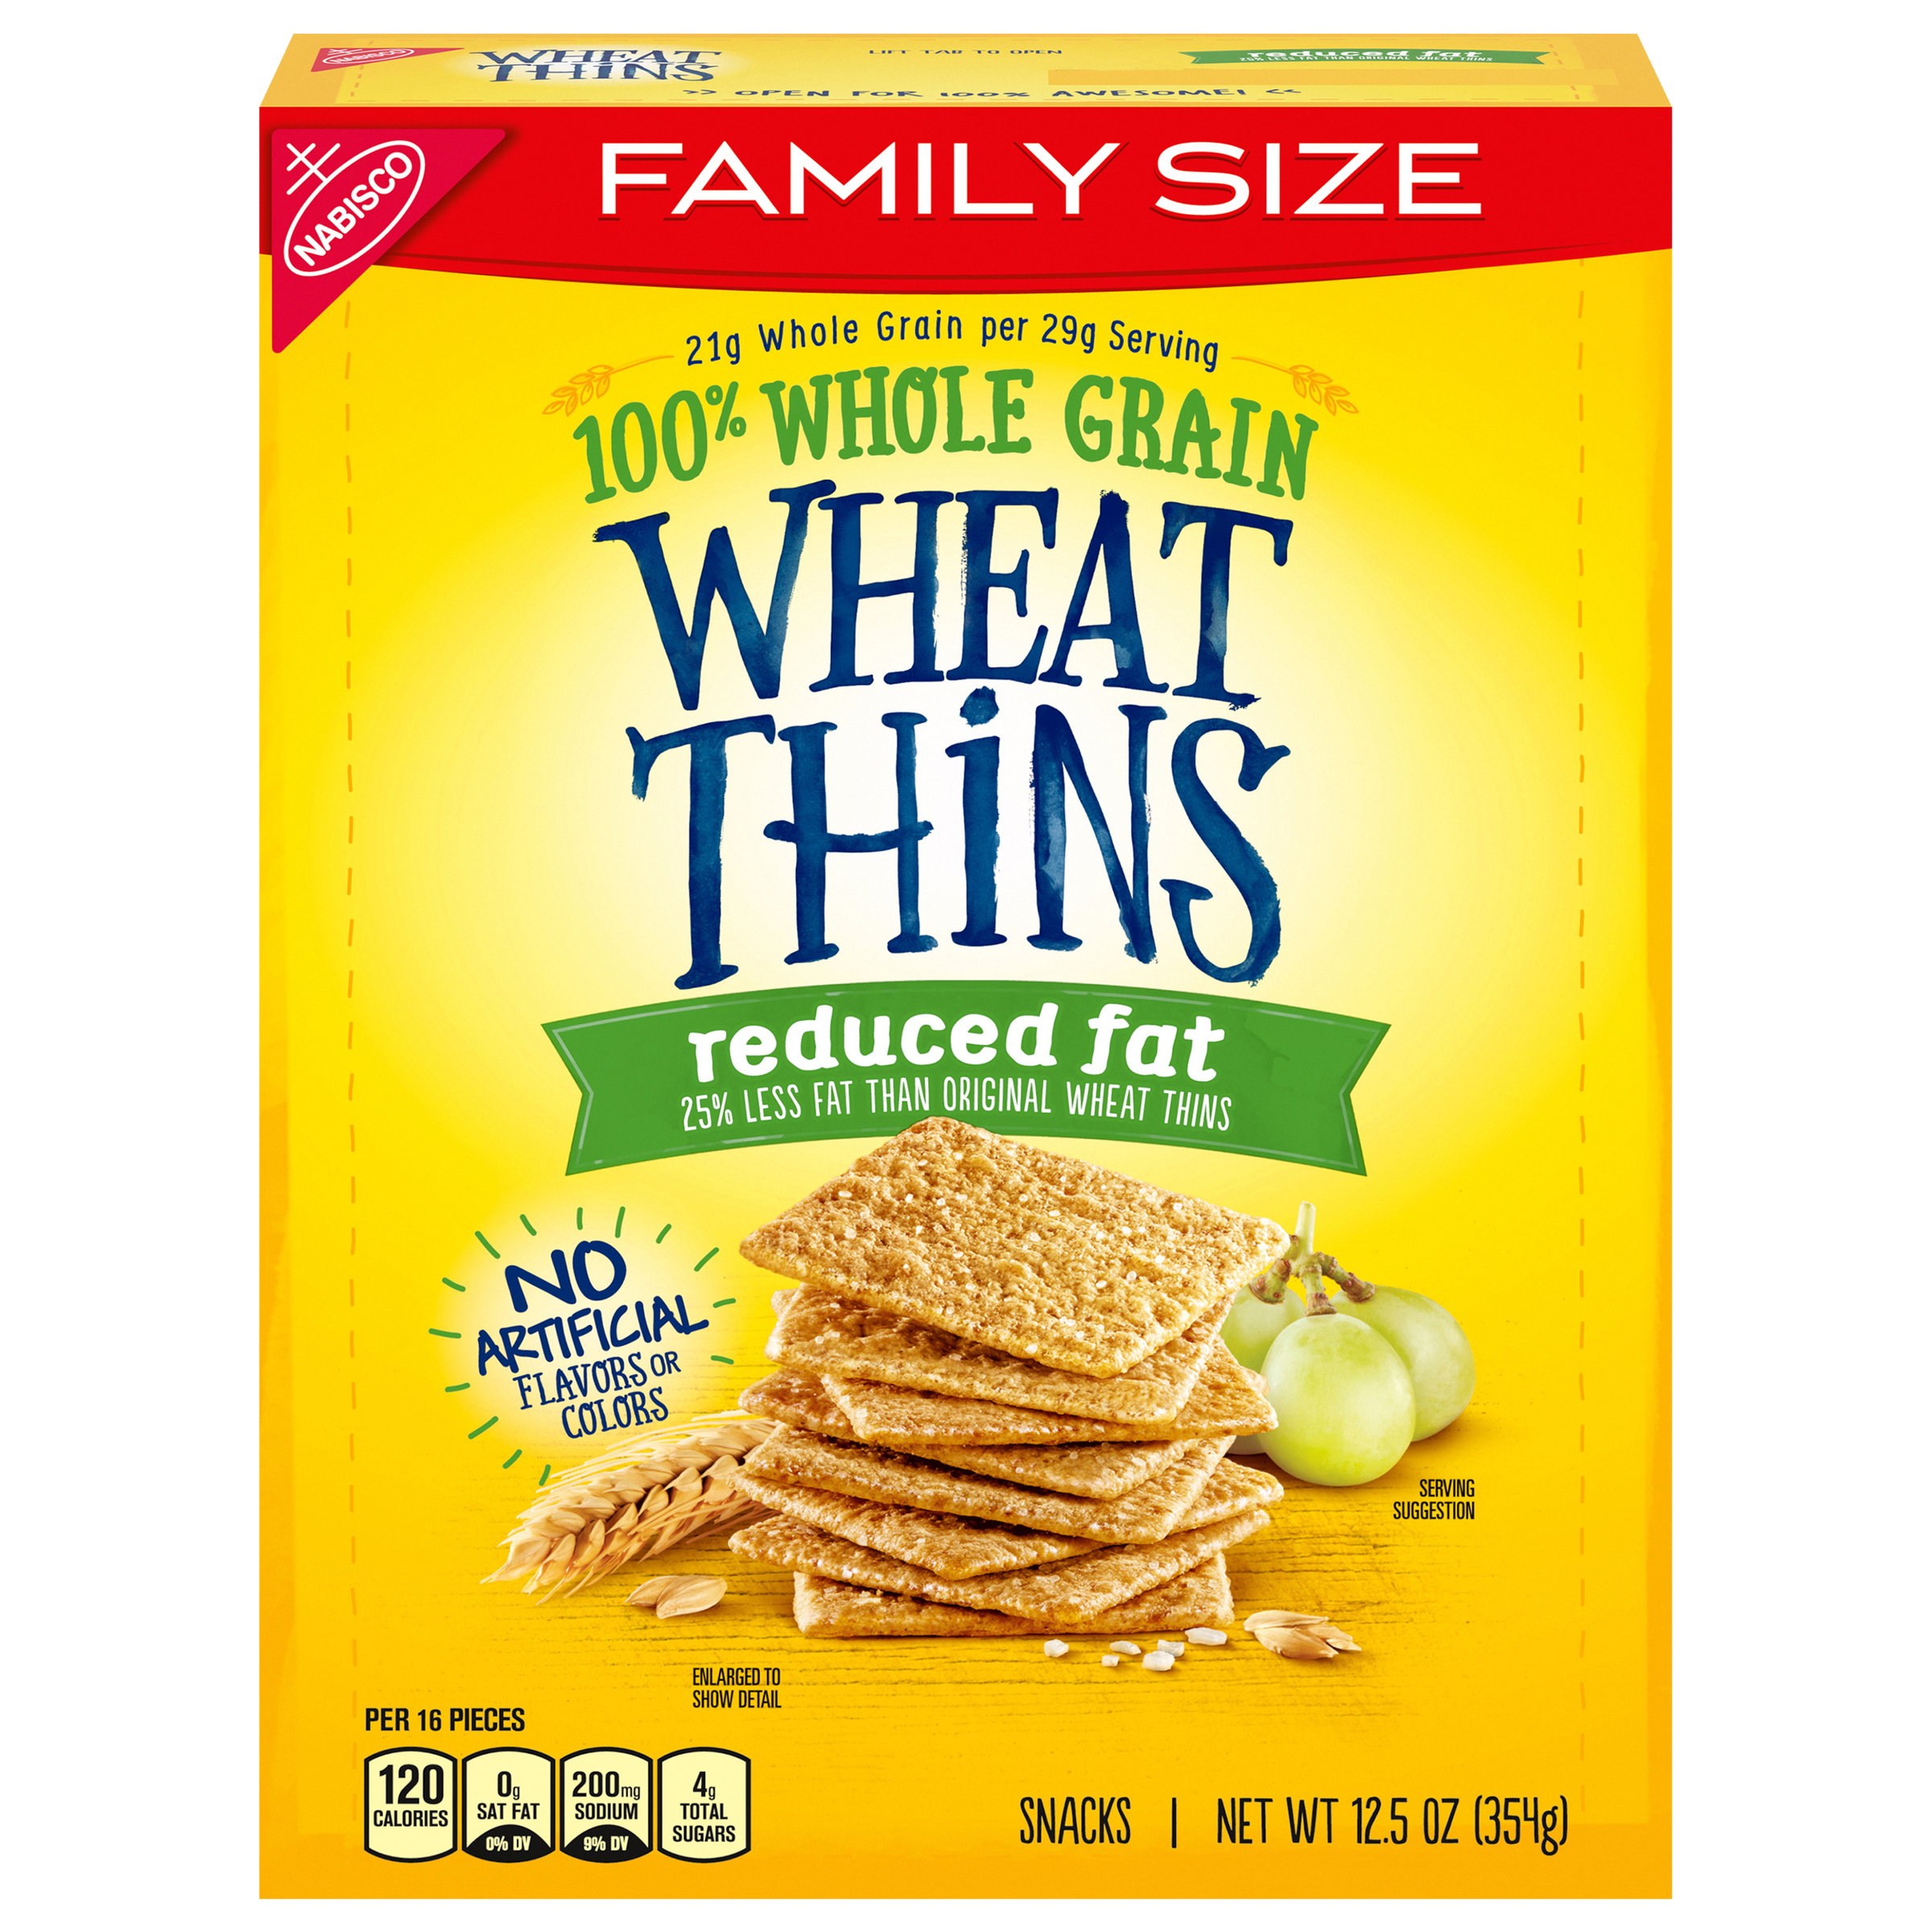 Wheat Thins Reduced Fat Whole Grain Wheat Crackers, Family Size, 12.5 oz-0